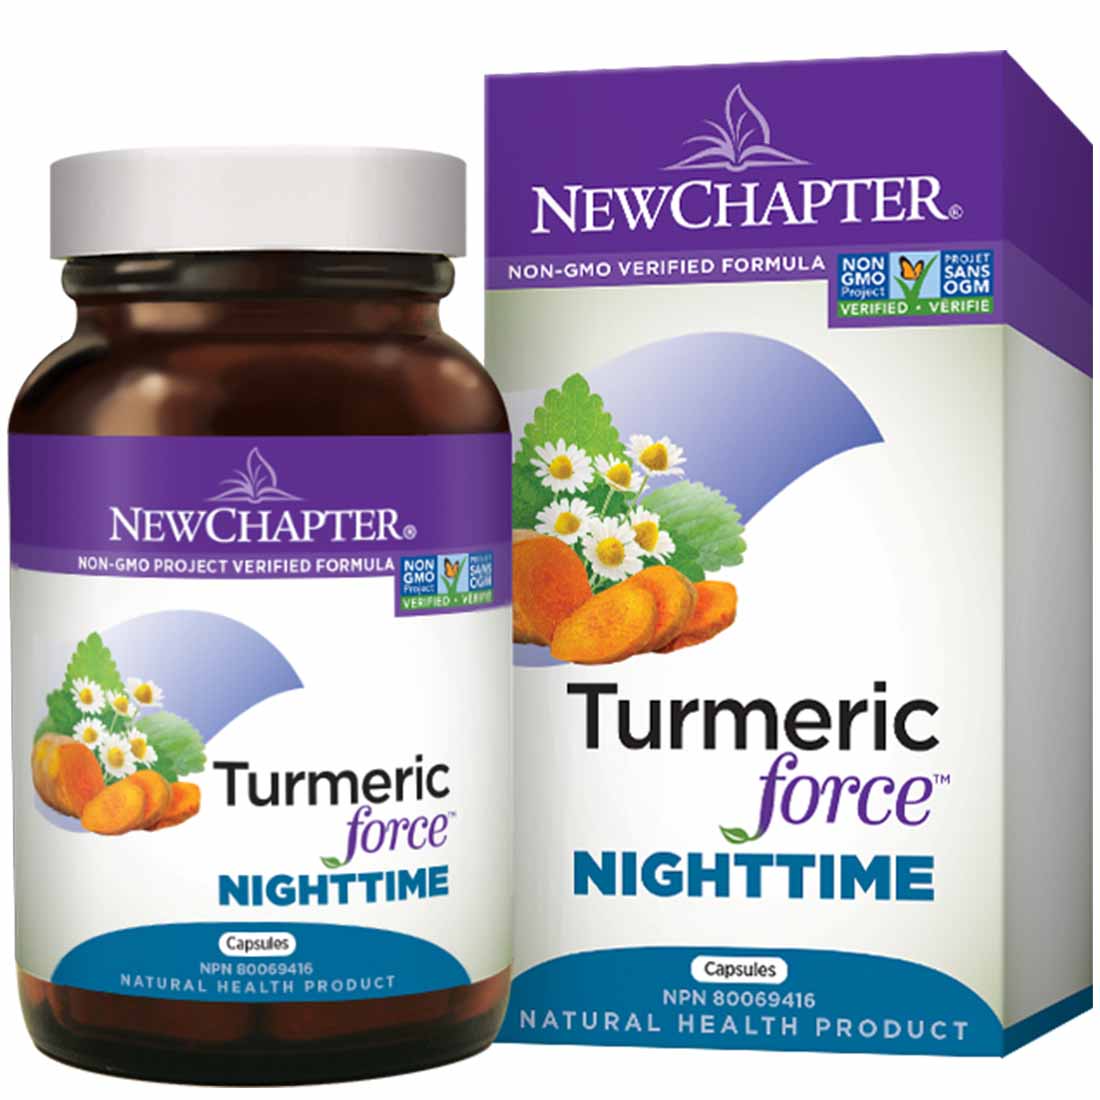 New Chapter Turmeric Force Nighttime, 48 Capsules